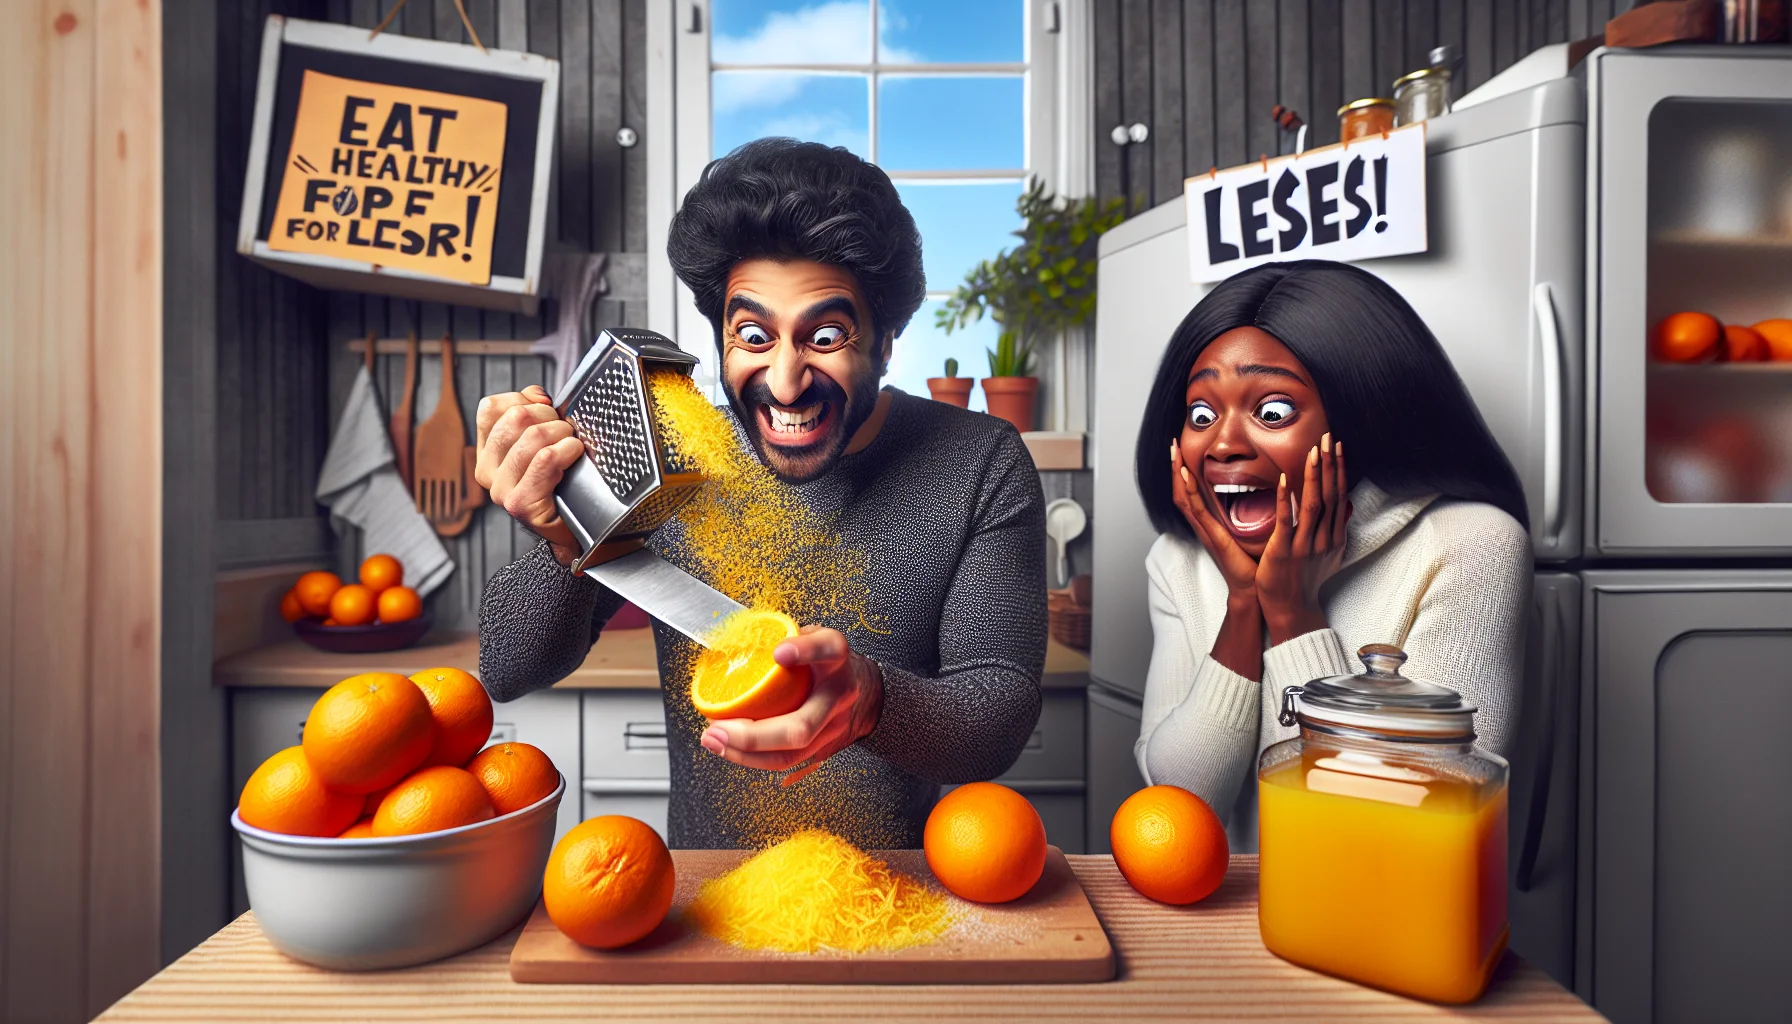 Generate a colorful and humorous scene in a cartoonish style. The scene happens in a modest home kitchen. A Middle-Eastern man stands at a countertop, grinning broadly, his eyes wide with excitement as he zestfully grates an orange, creating a lively spray of zesty particles. Near him, a black woman is shown gasping in surprise, a clear plastic bag of store-bought zest in her hand as she reads the price tag, her eyes nearly popping out. On the countertop, a pile of fresh oranges sits invitingly next to a cleverly homemade sign reading, 'Eat Healthy for Less!'